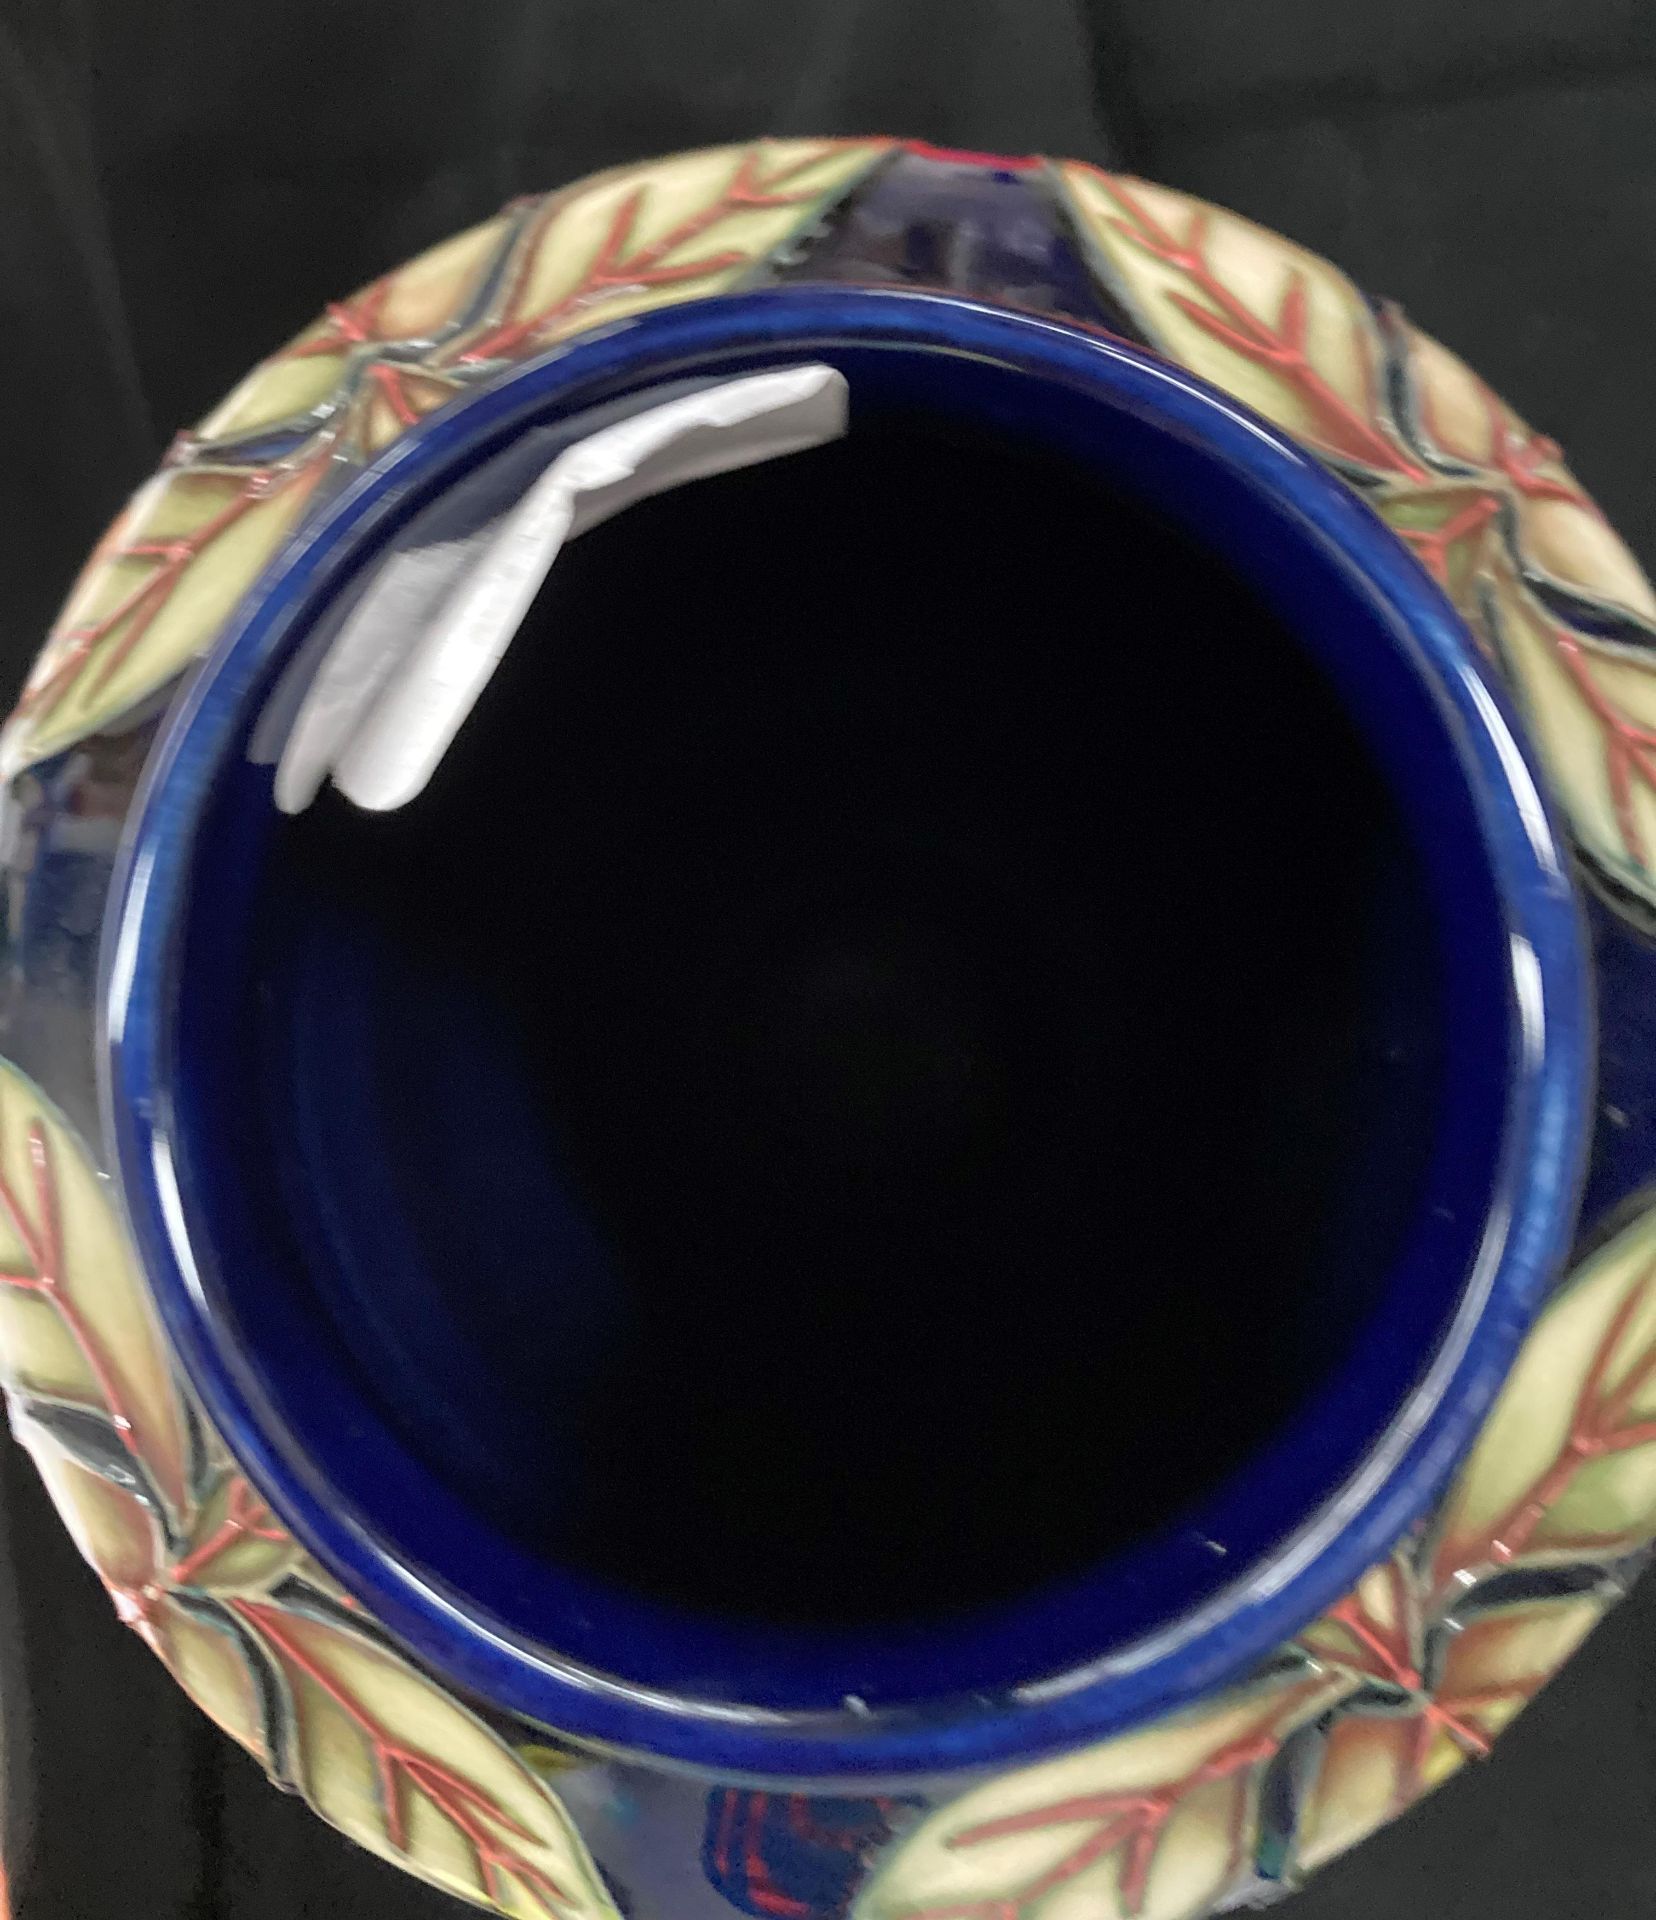 A Moorcroft trial vase in cream, blue and pink glazed pattern - signed to base 'PT Trial 28.07. - Image 6 of 10